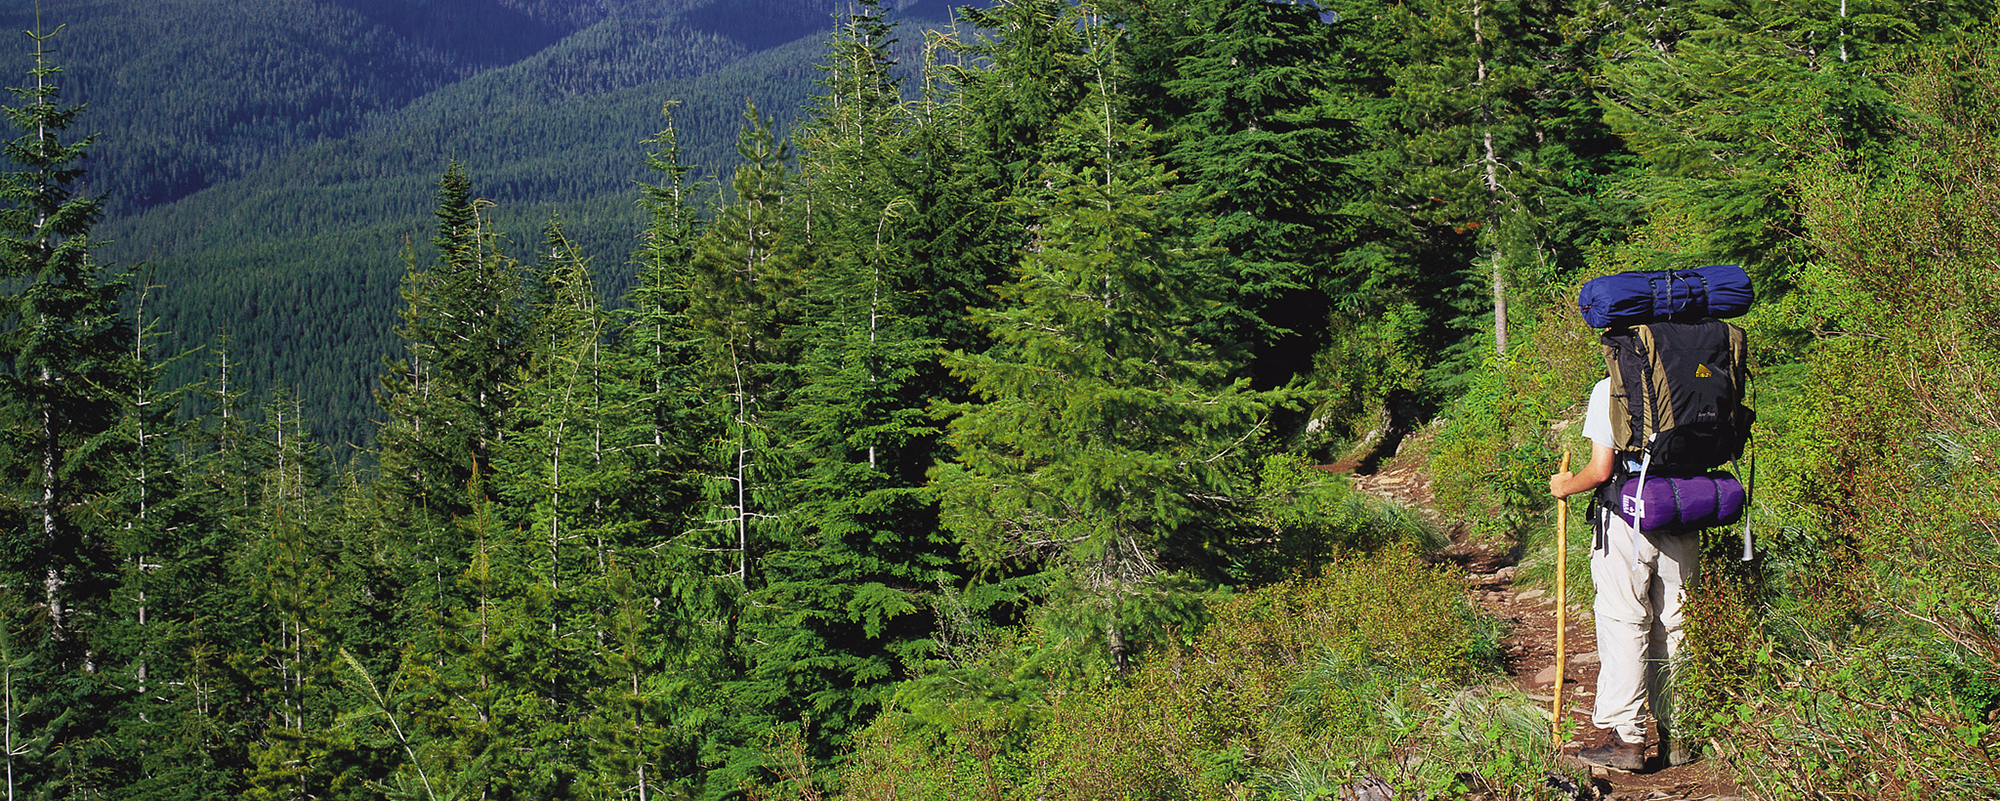 woman hiking on mountaintop surrounded by trees